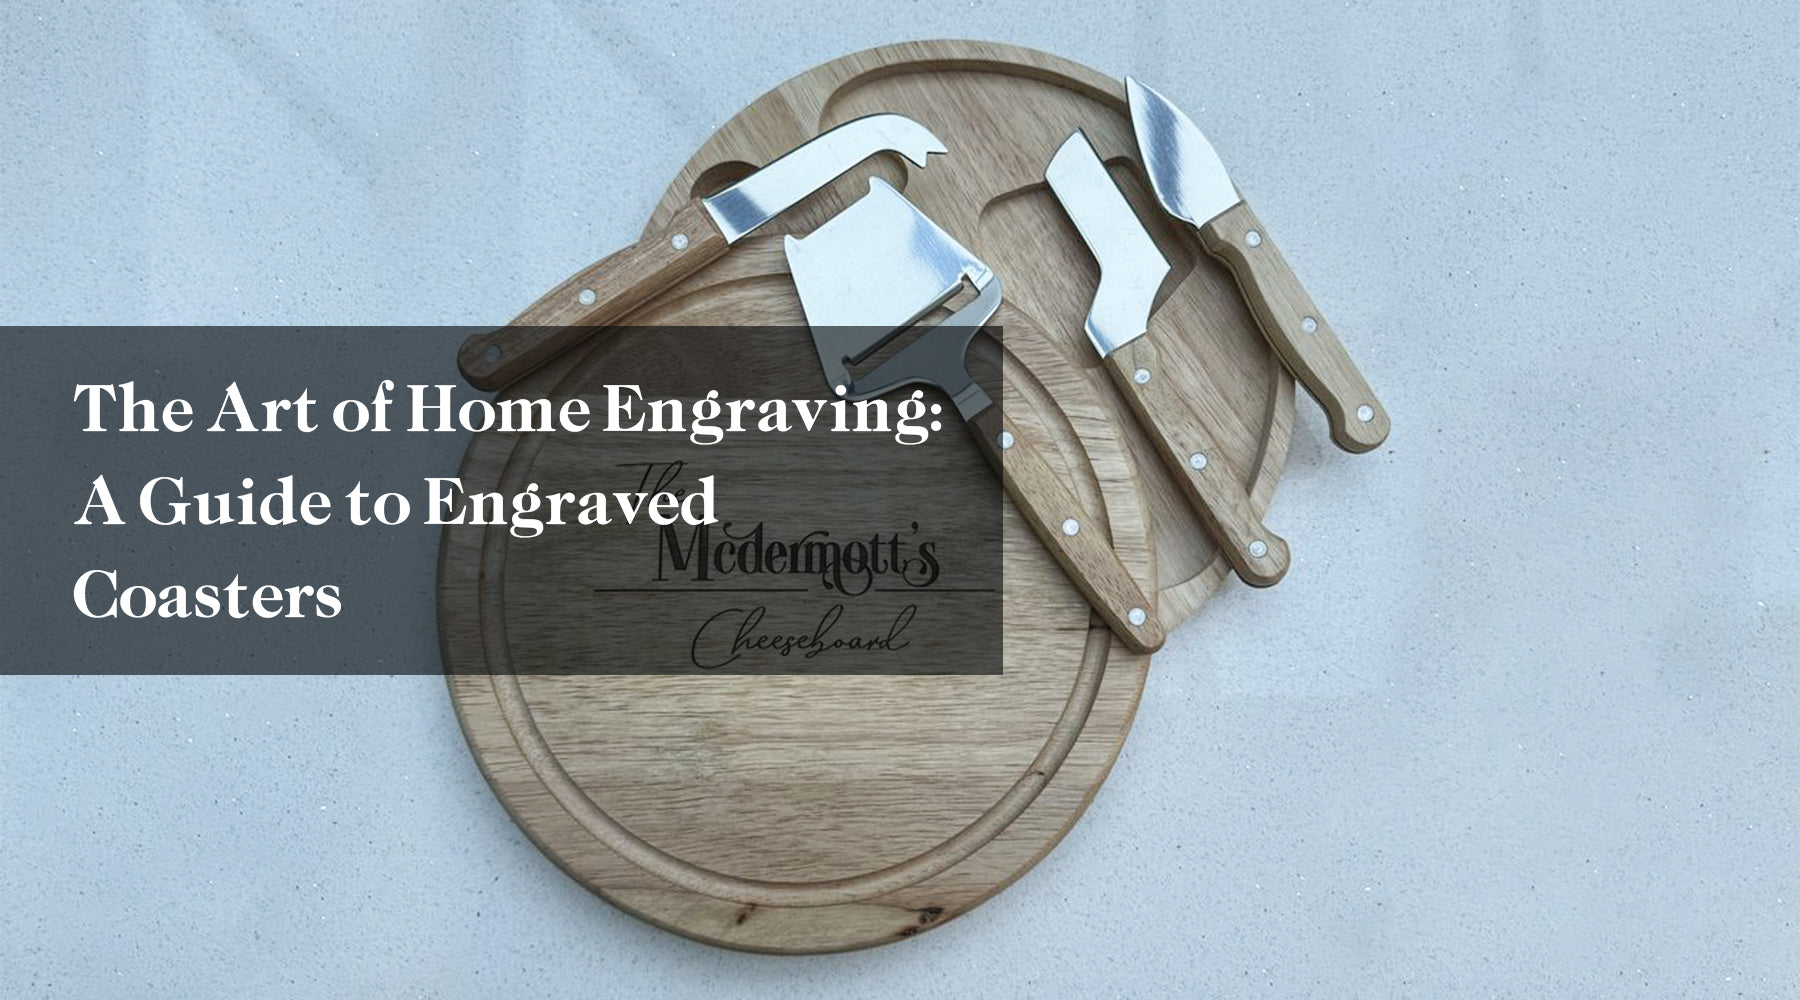 The Art of Home Engraving: A Guide to Engraved Coasters